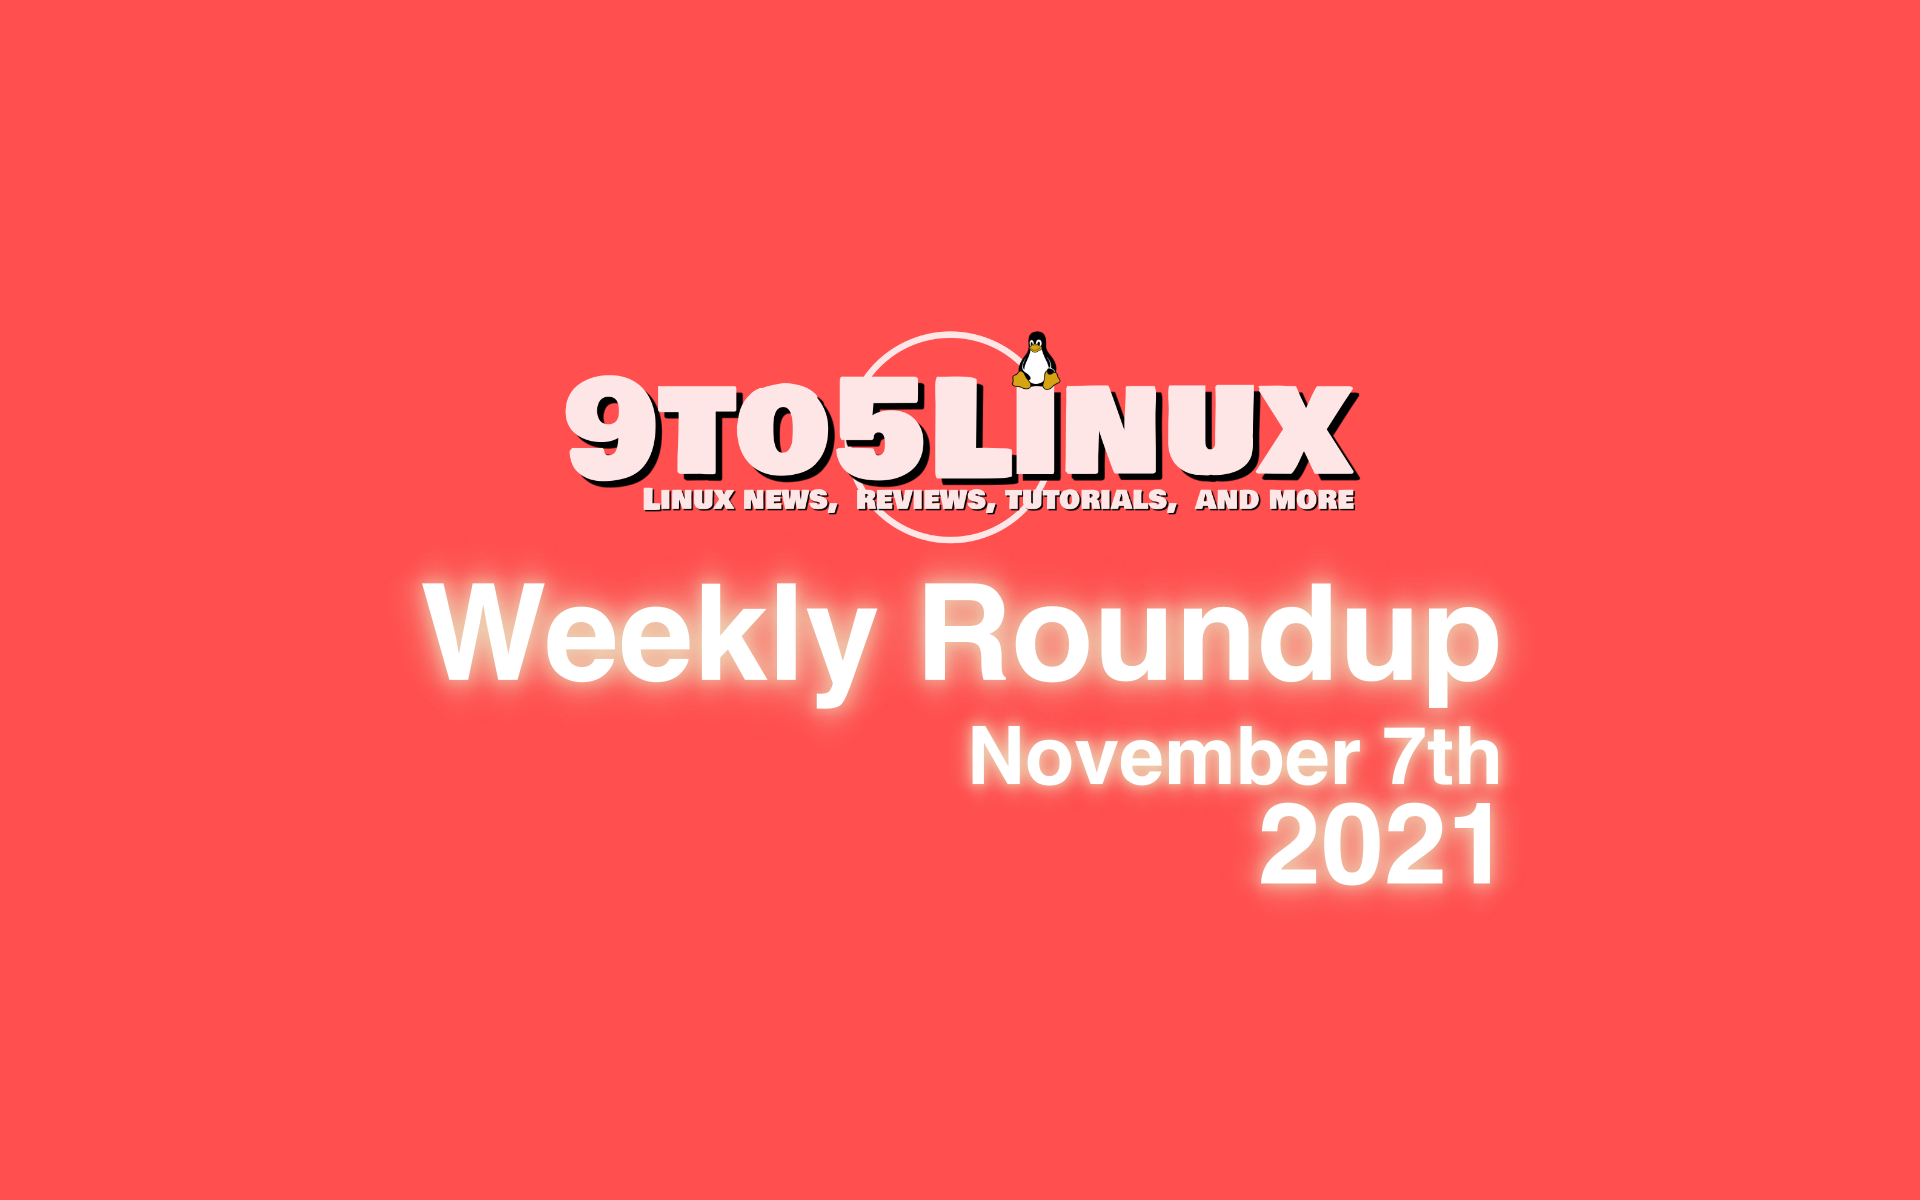 9to5Linux Weekly Roundup: November 7th, 2021